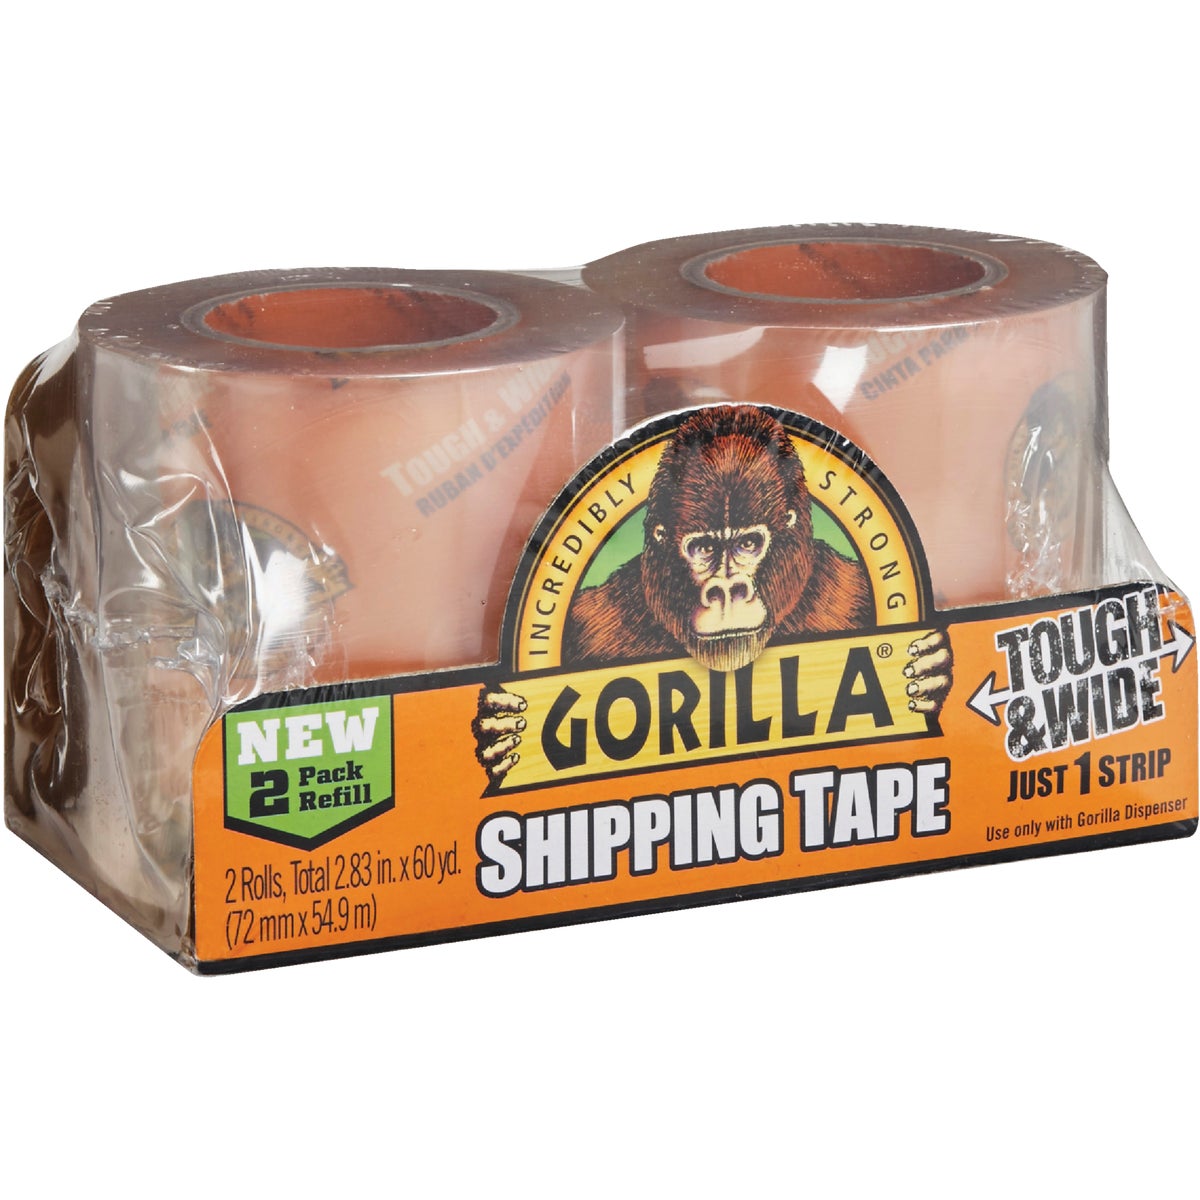 Item 970529, Gorilla shipping tape is thicker, tougher and wider.